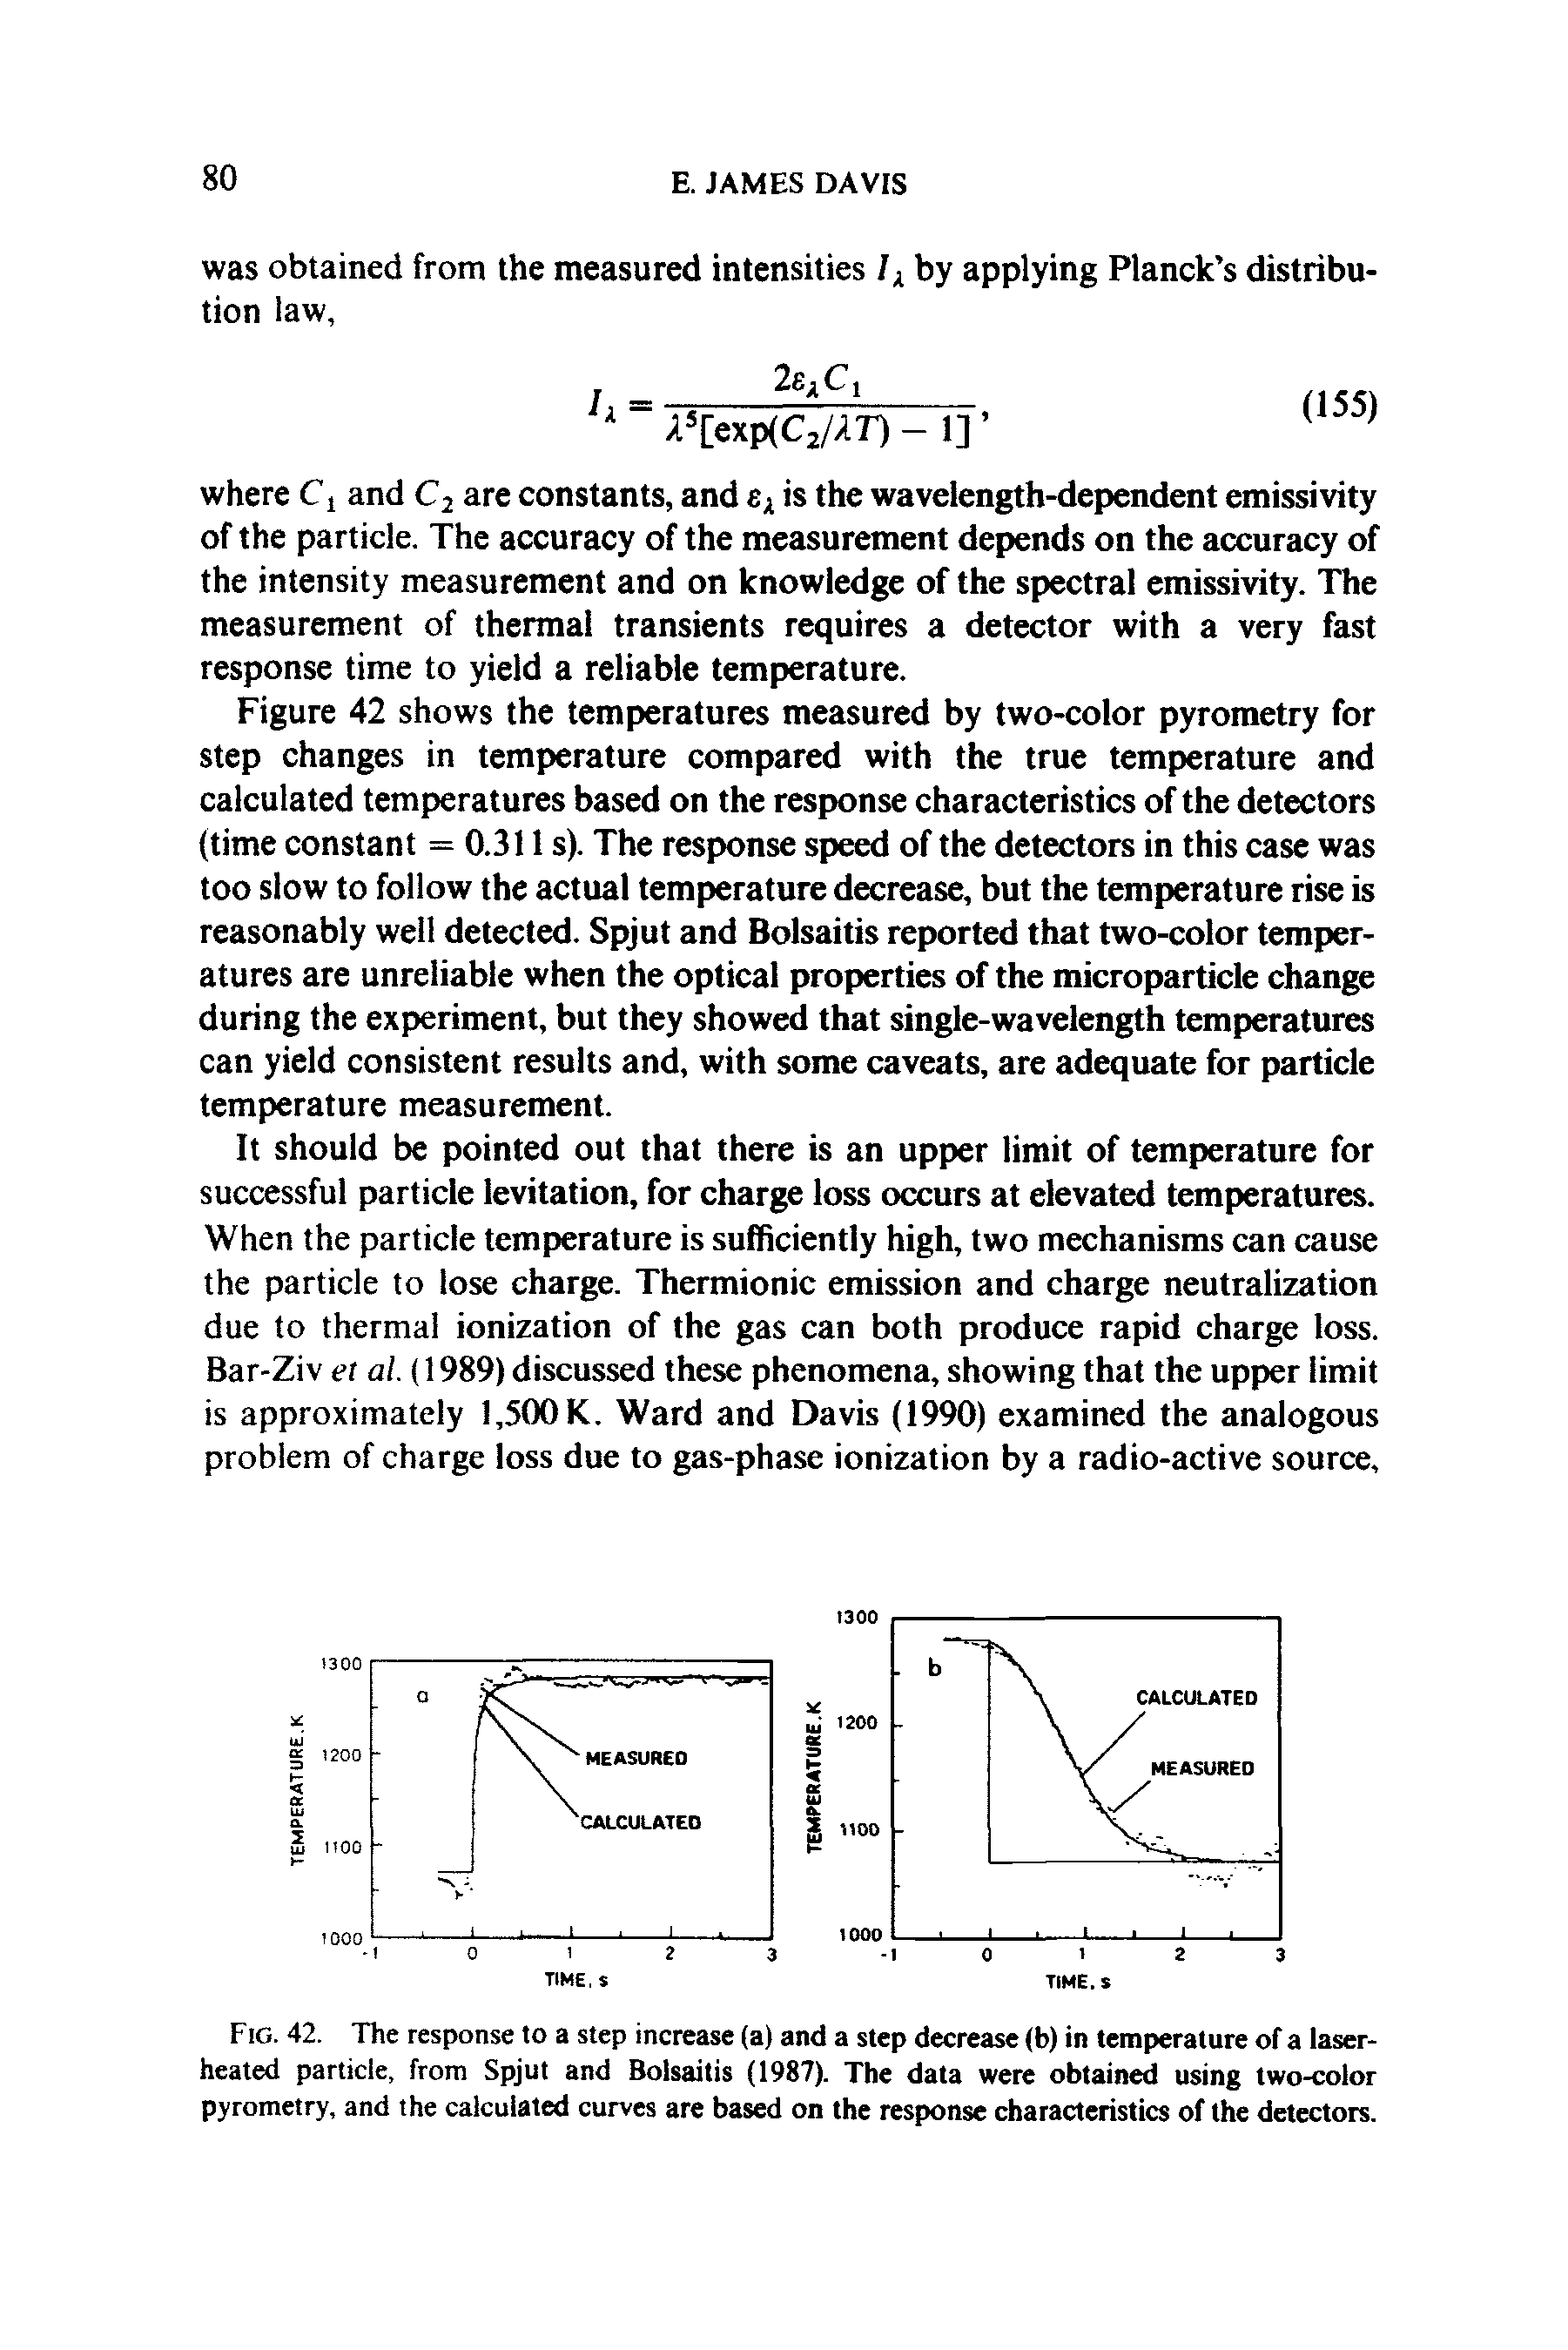 Fig. 42. The response to a step increase (a) and a step decrease (b) in temperature of a laser-heated particle, from Spjut and Bolsaitis (1987). The data were obtained using two-color pyrometry, and the calculated curves are based on the response characteristics of the detectors.